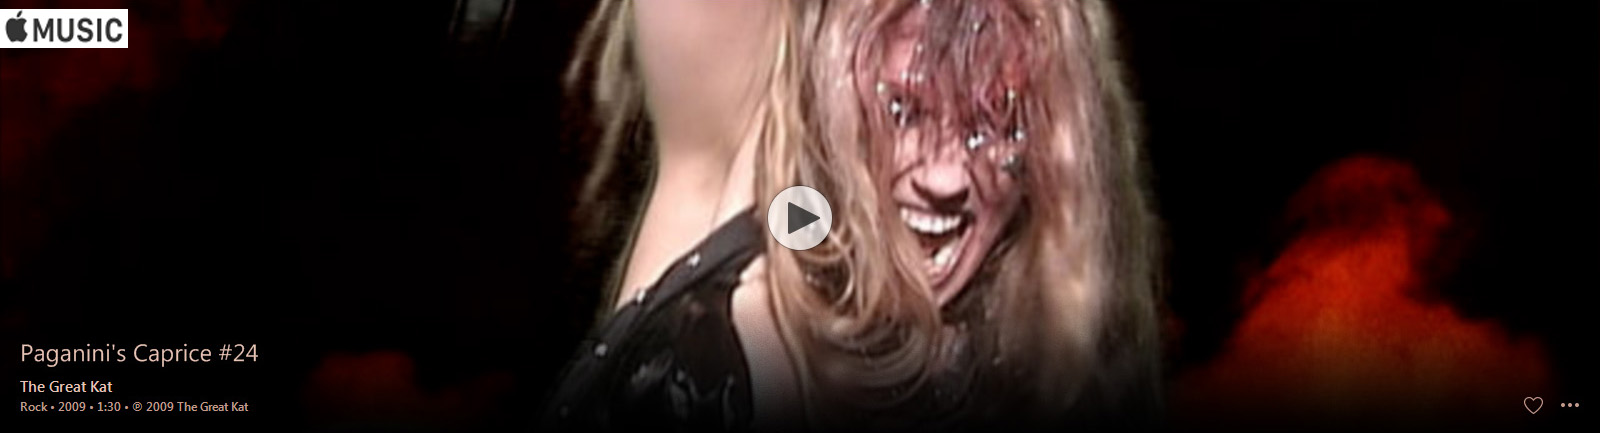 APPLE MUSIC is NOW STREAMING The Great Kat's PAGANINI'S "CAPRICE #24" MUSIC VIDEO!